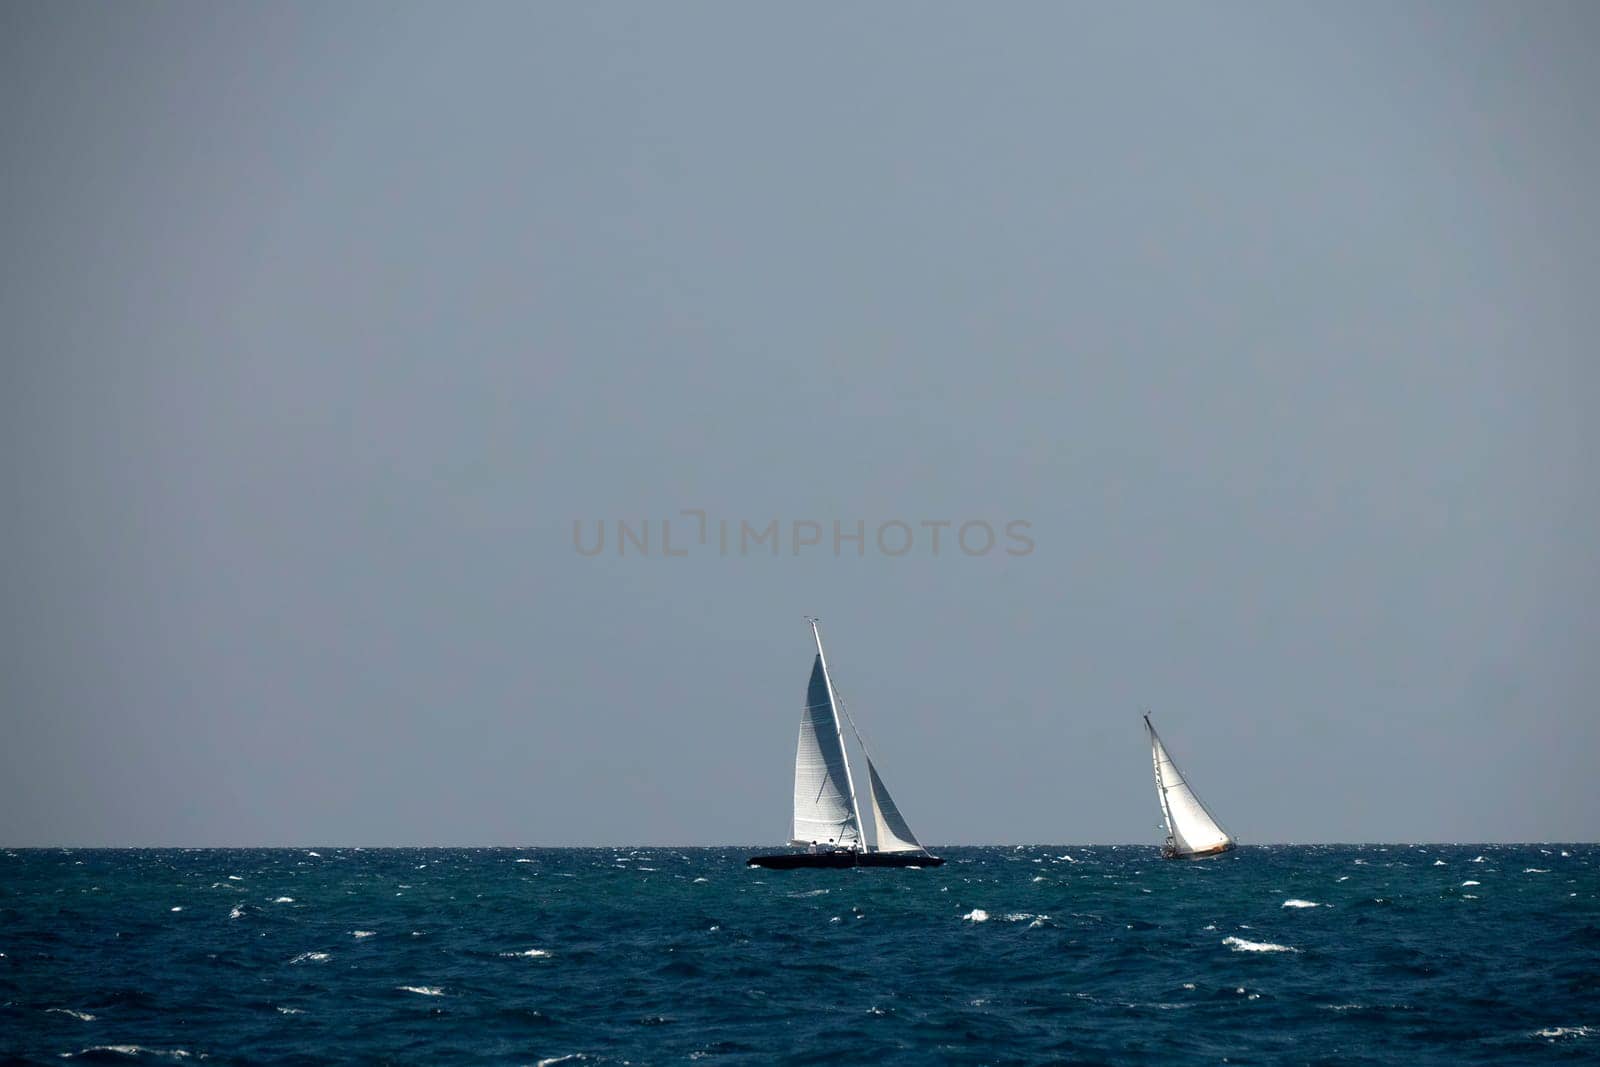 A strong wind regatta in barcelona Sailing ship in a strong wind. Yachting